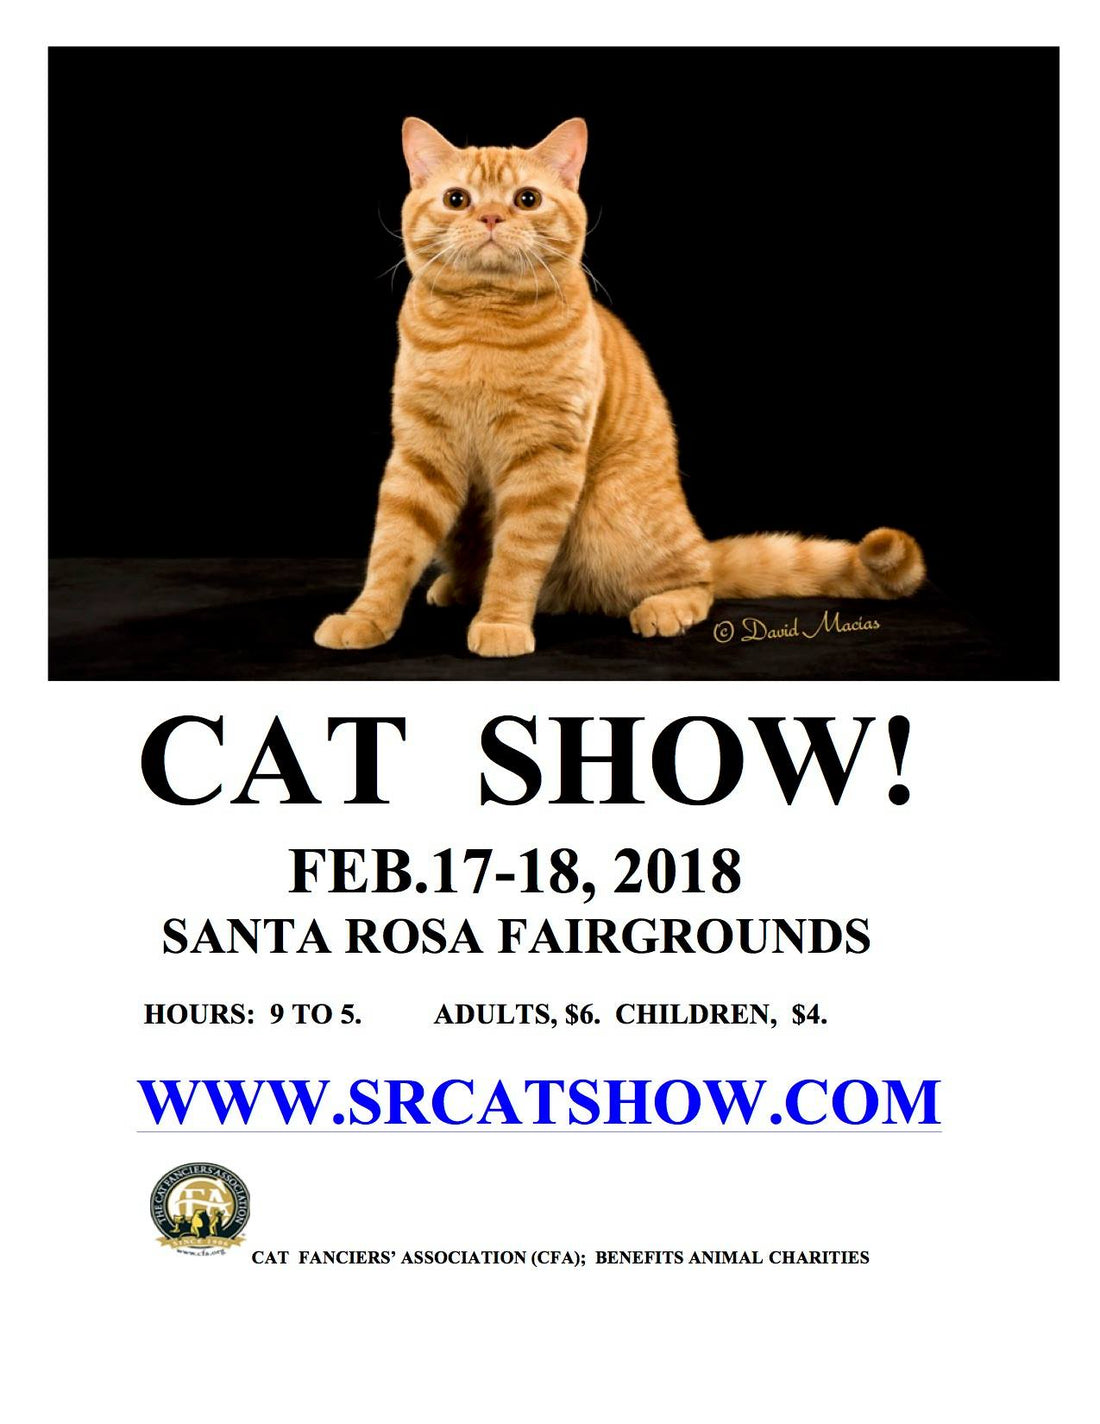 UPCOMING EVENT - CAT SHOW IN SANTA ROSA on February 17 & 18, 2018